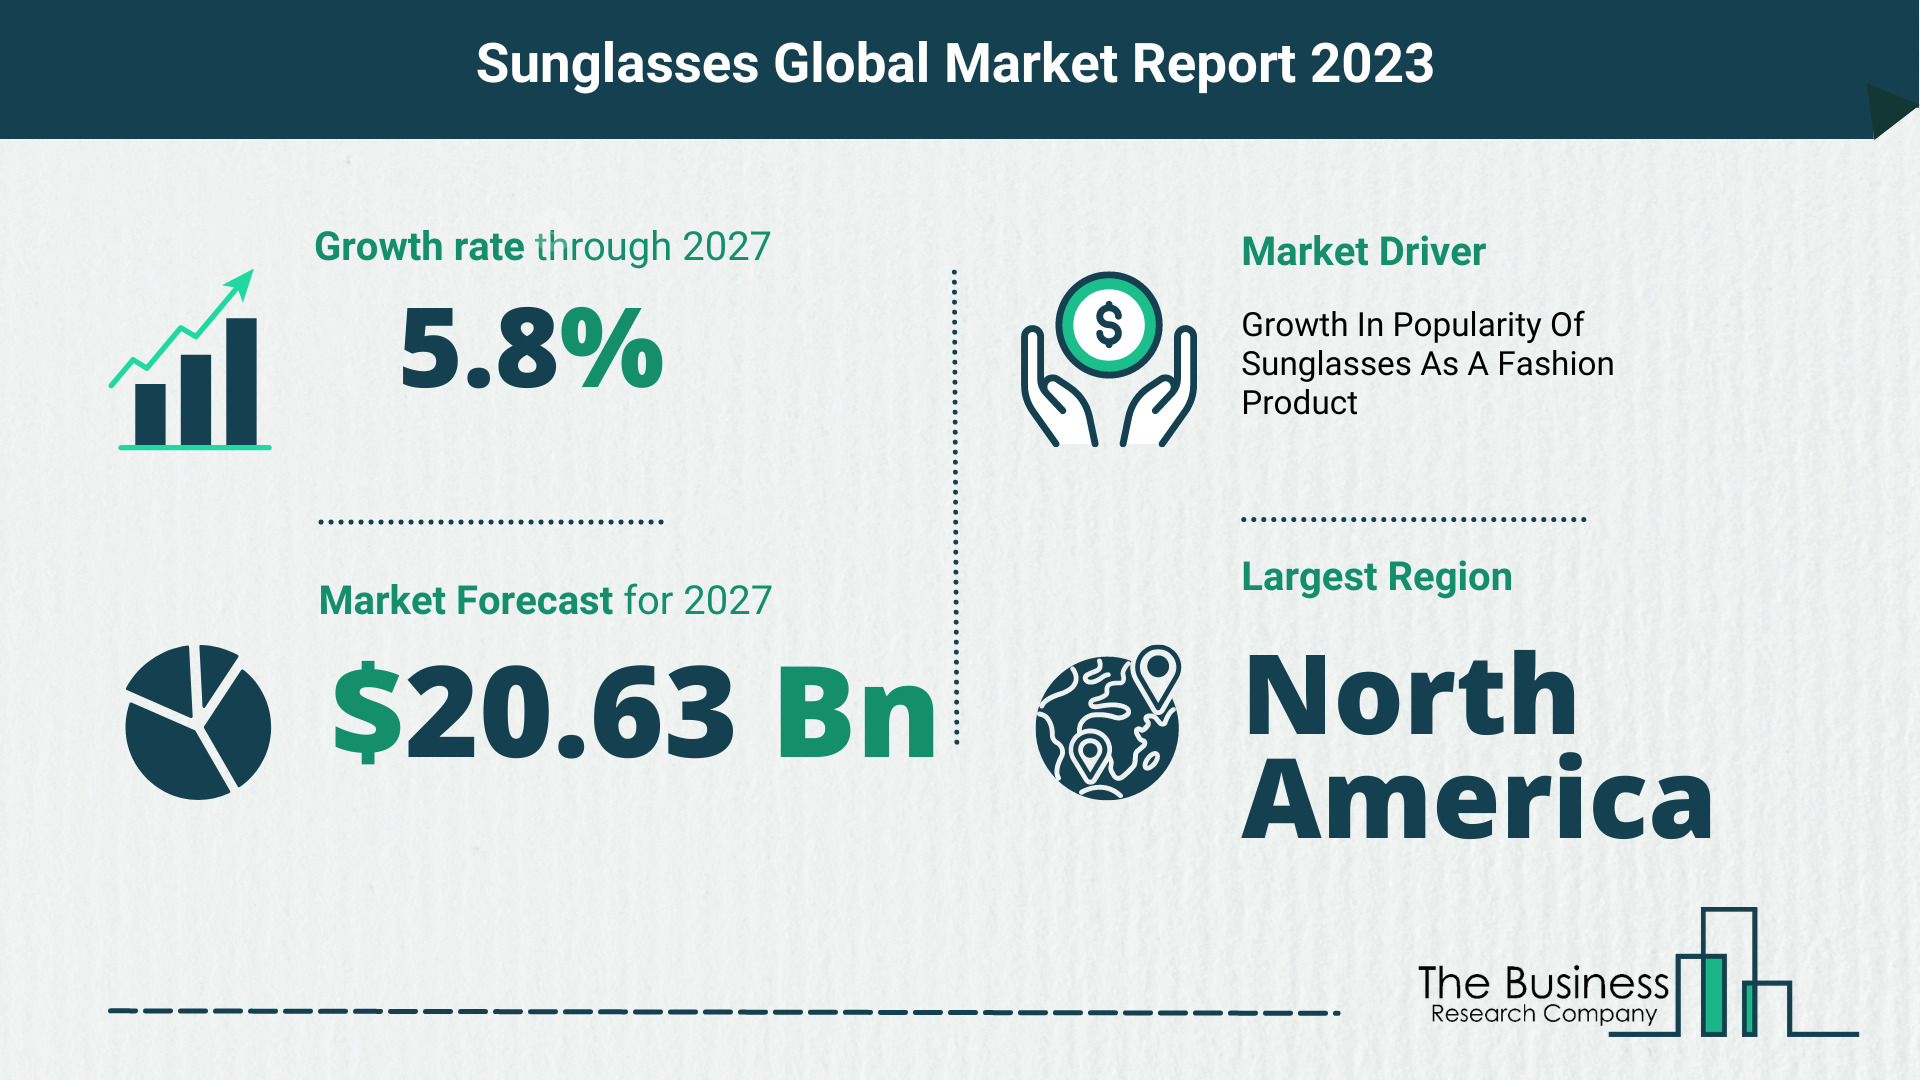 Sunglasses Market Size, Share, And Growth Rate Analysis 2023